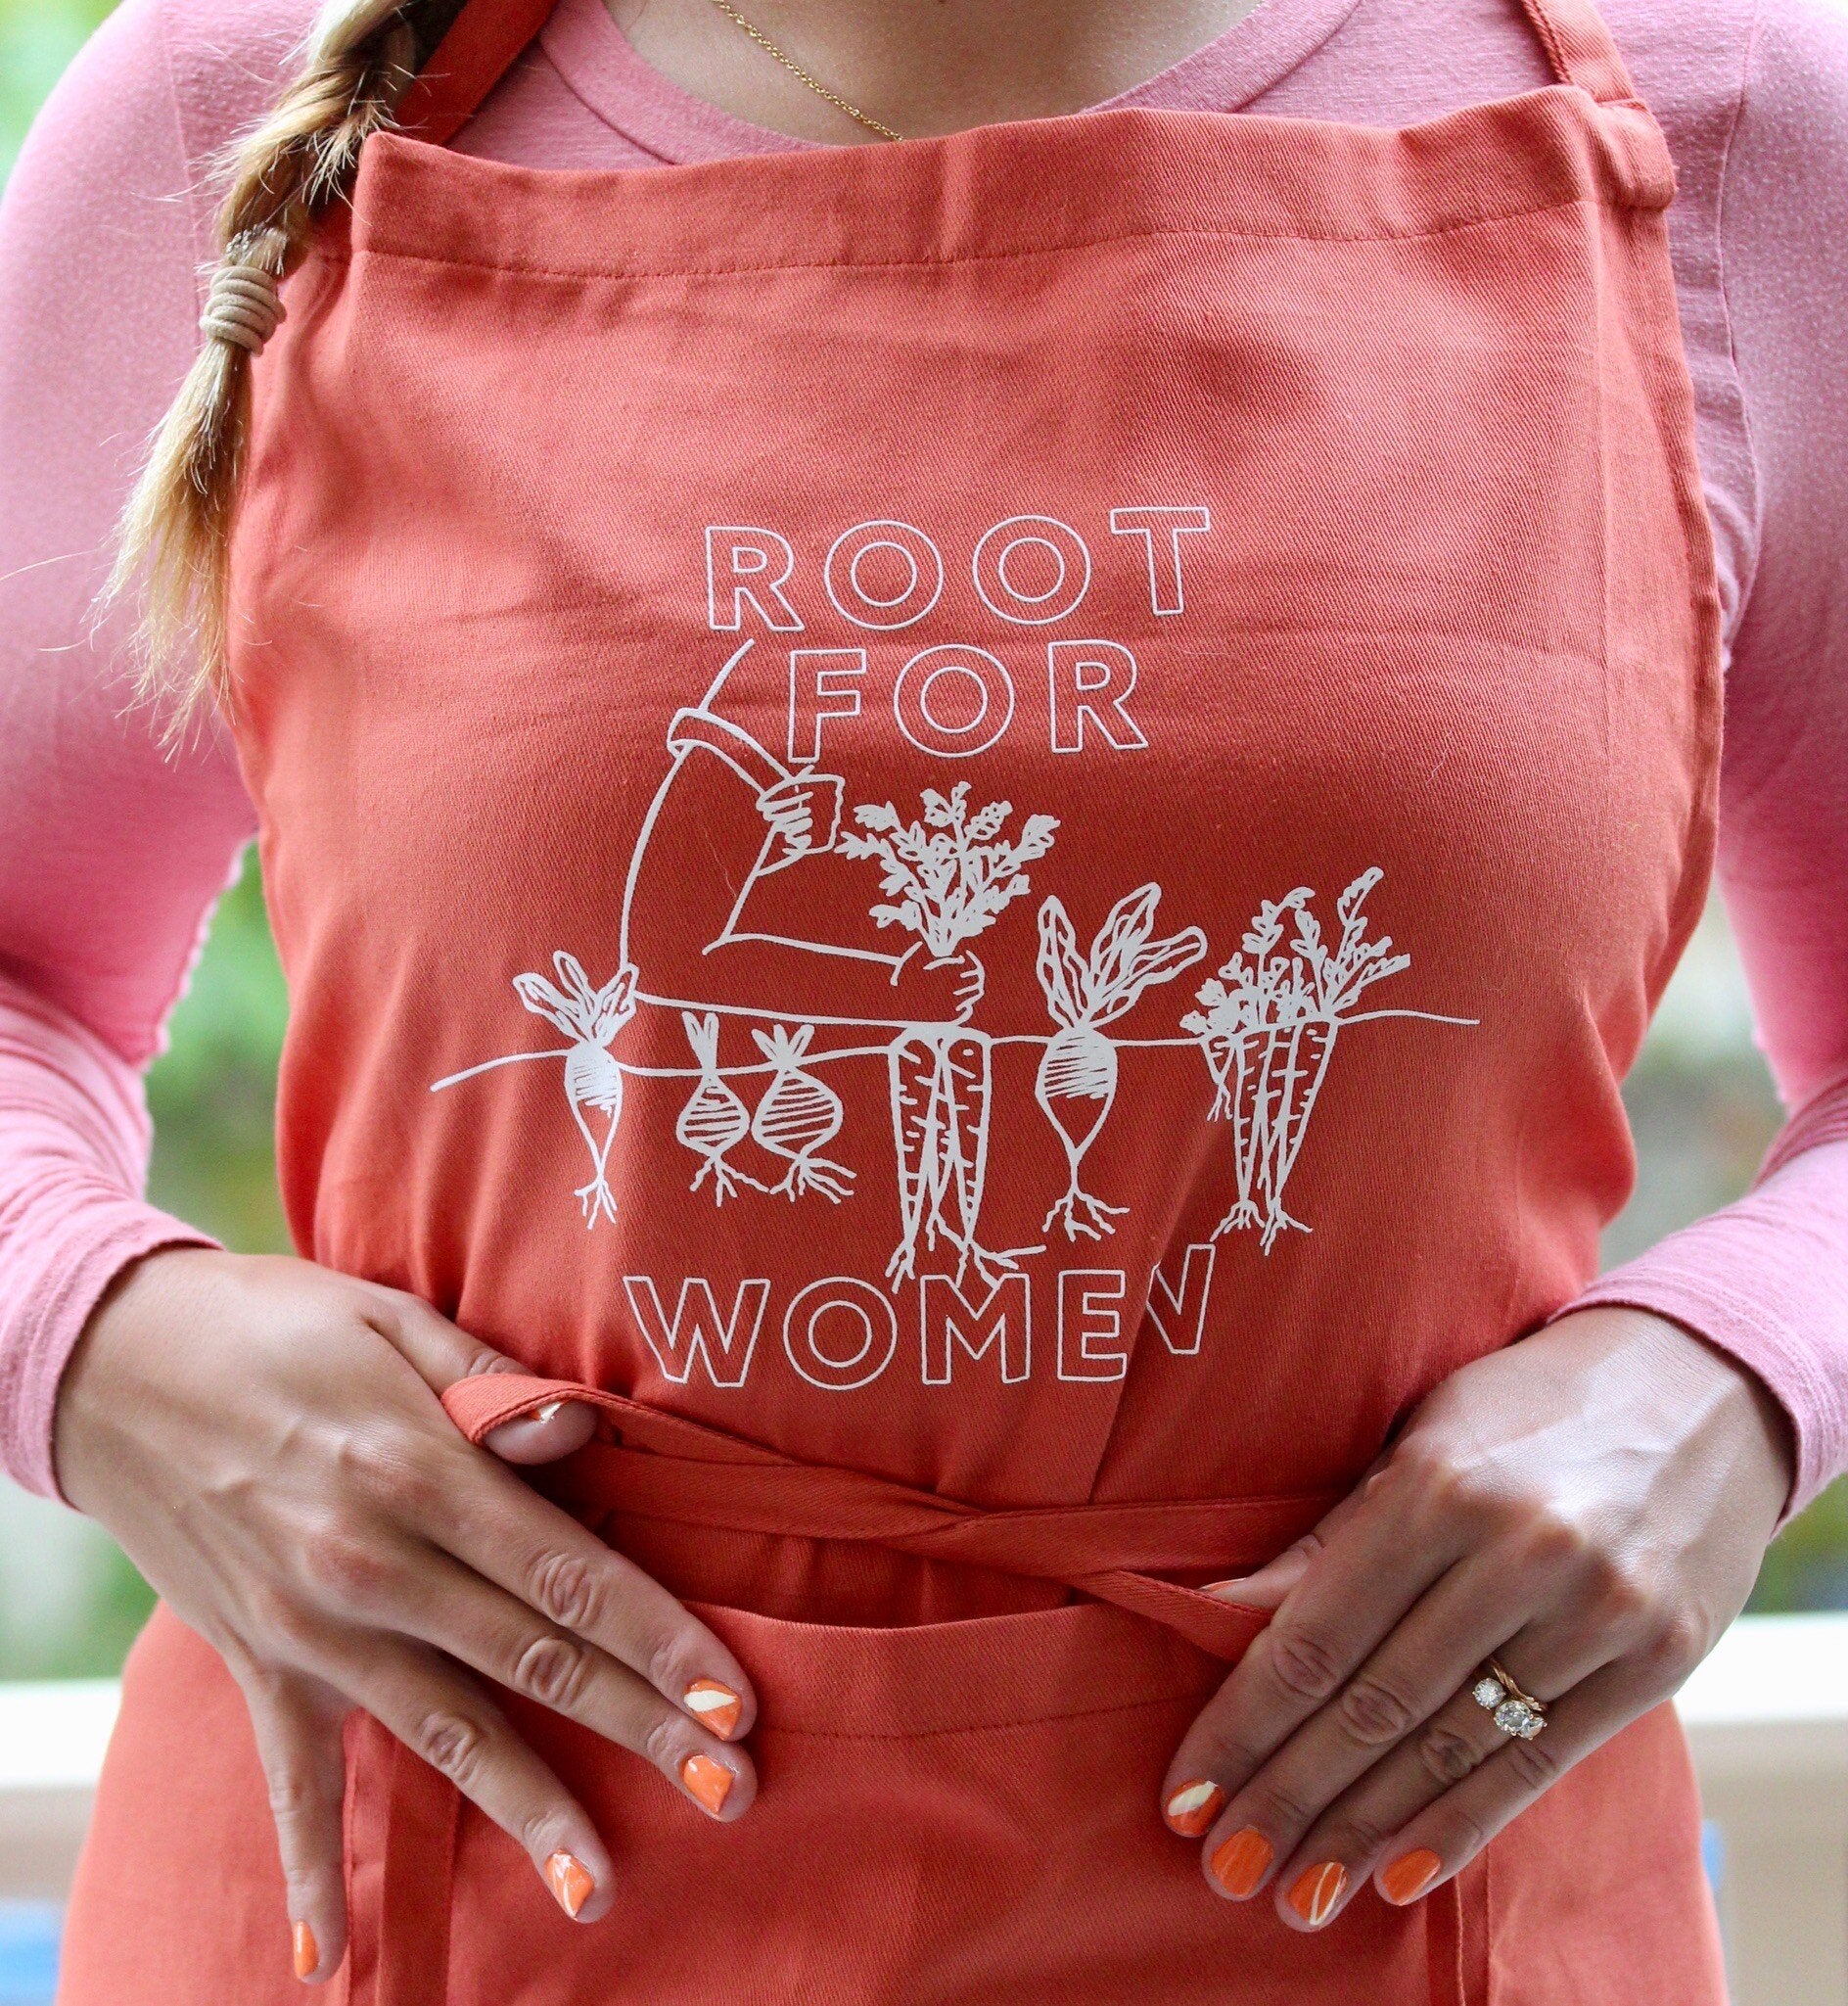 A woman wears a "Root for Women" apron over a pink top